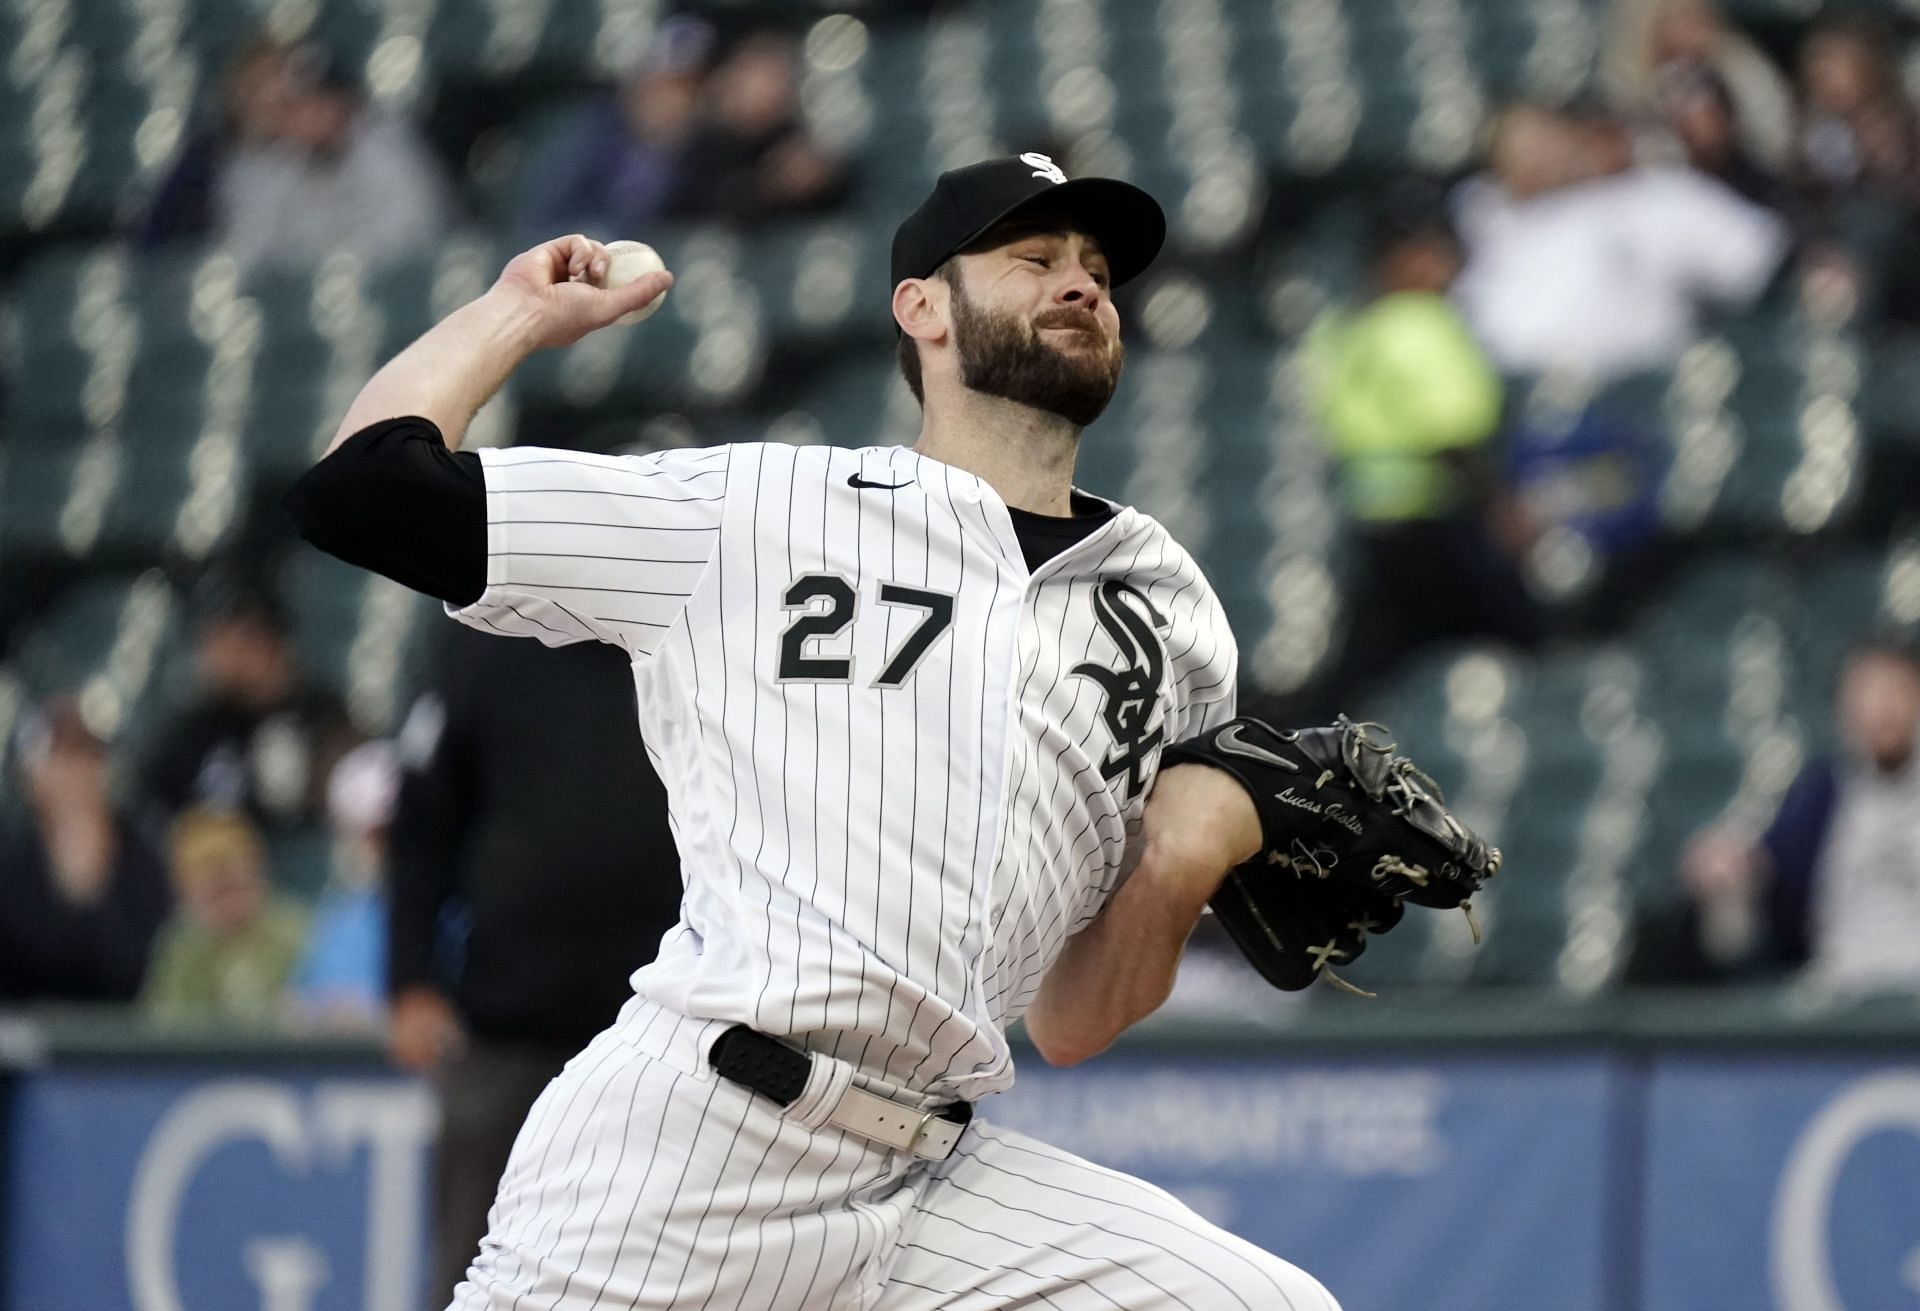 Chicago White Sox fans unhappy with team's performance against the